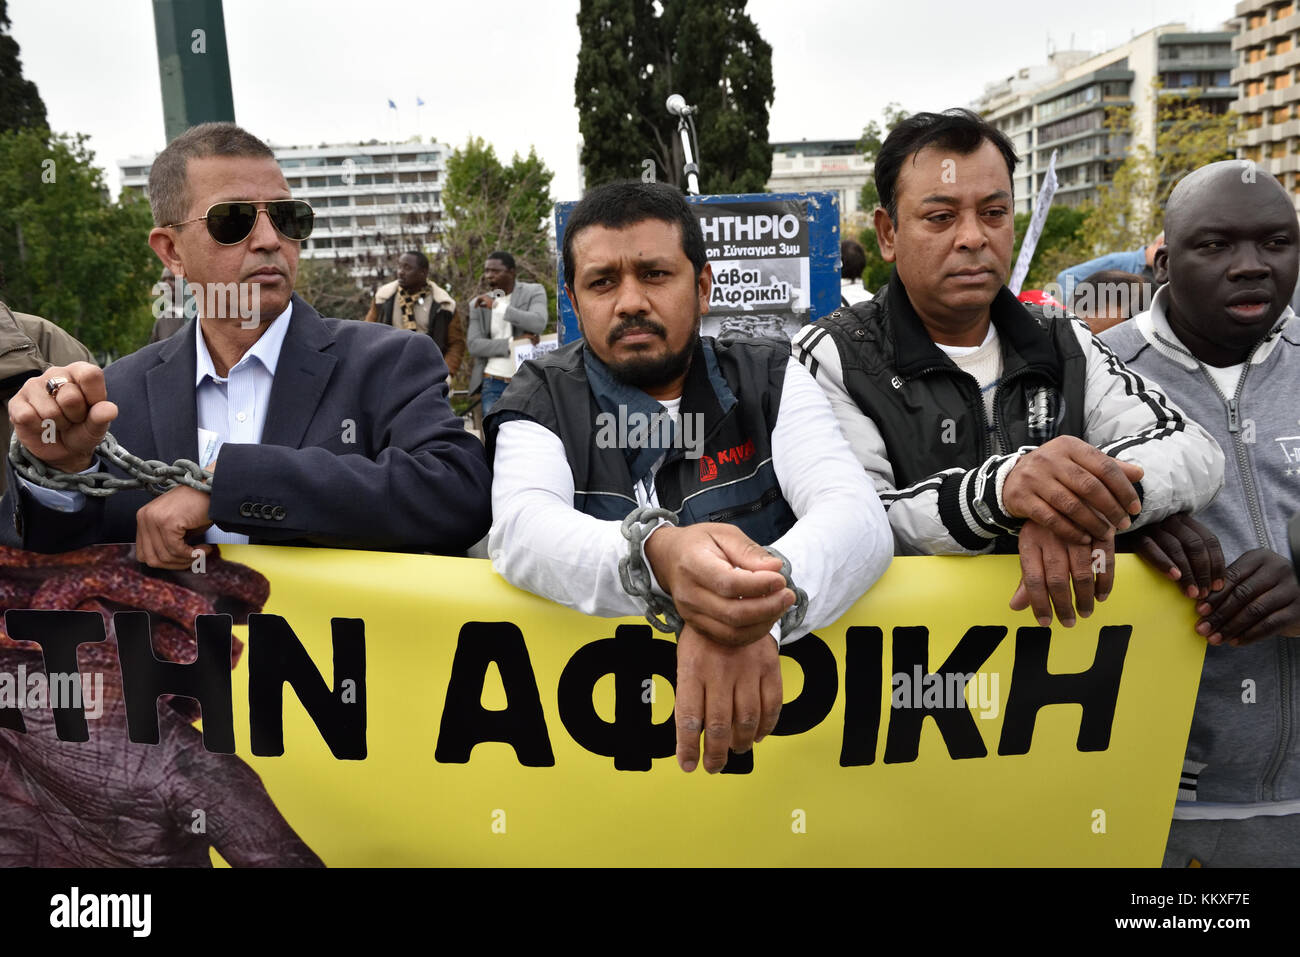 Athens, Greece. 2nd Dec, 2017. Protesters with chained hands rally  against slave trade in Africa, in Athens, Greece. Credit: Nicolas Koutsokostas/Alamy Live News. Stock Photo